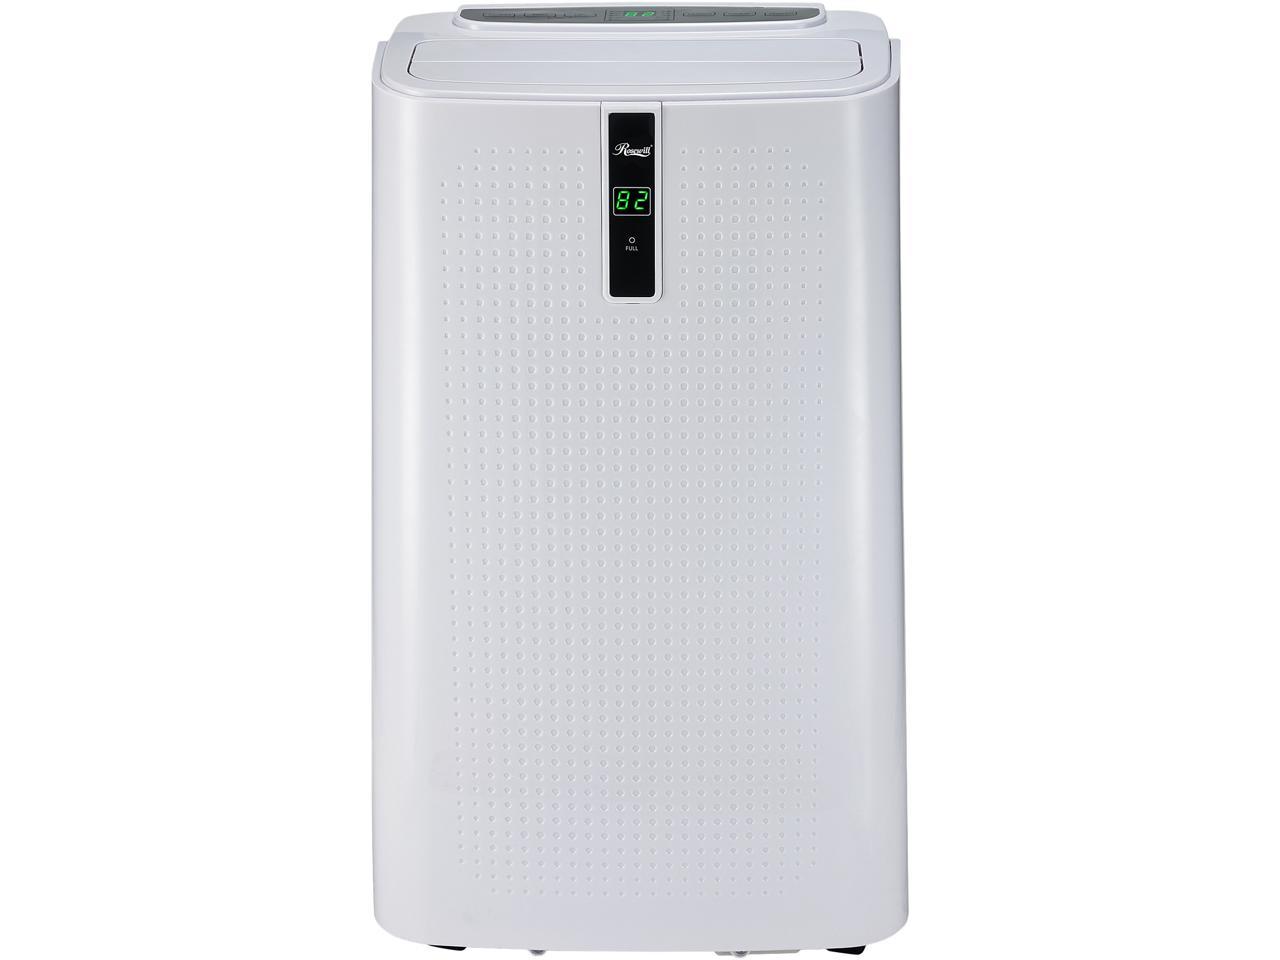 Rosewill RHPA-18003 Portable Air Conditioner with Dehumidifier & Heater